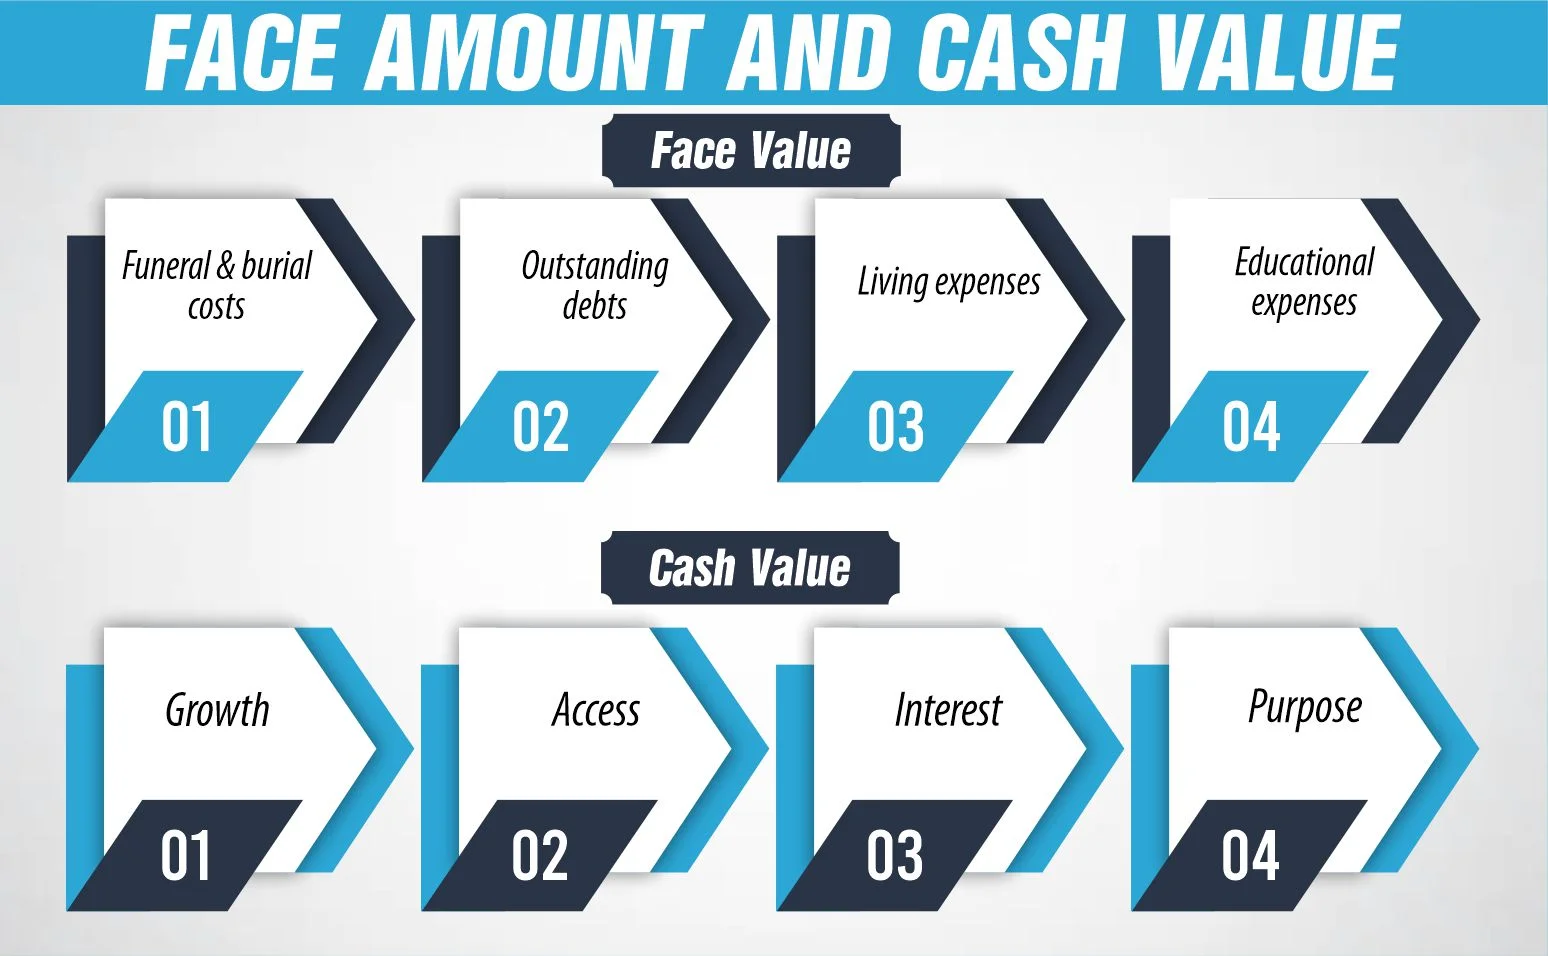 Face amount and cash value